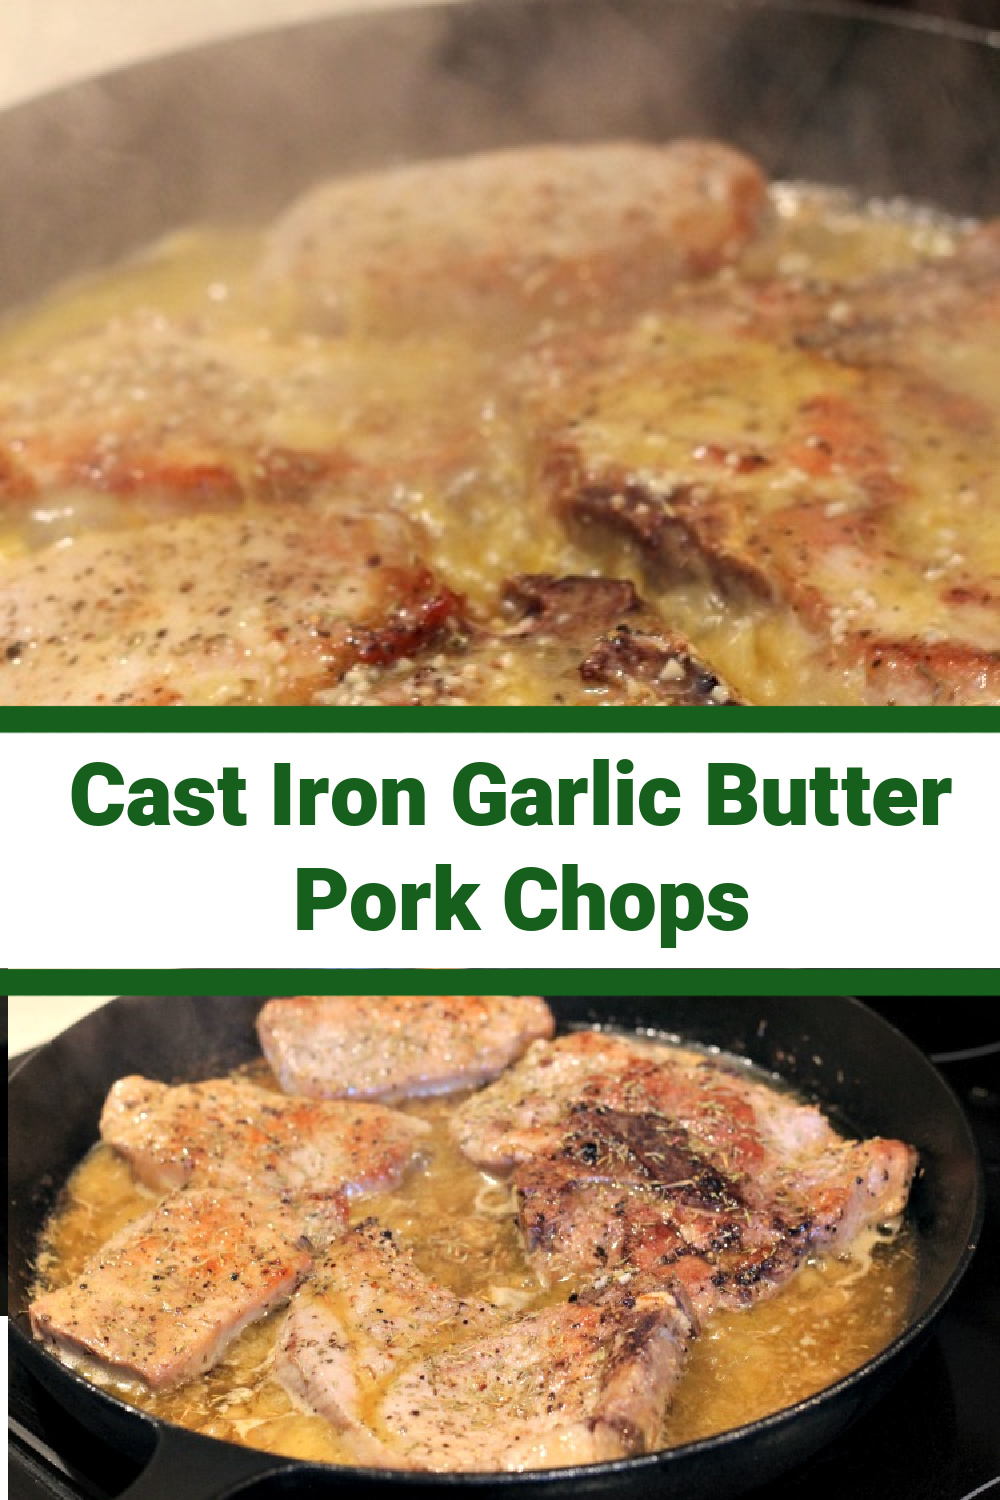 Garlic Butter Cast Iron Pork Chops Recipe is the perfect easy weeknight dinner with a cast-iron skillet! Makes perfect Juicy and flavorful pork chops! Start your pork chops out on the stove and then move them in the oven to slow cook in the flavor of the butter, garlic, and theme into the pork chop! This pairs amazing with oven-roasted potatoes or other vegetables!